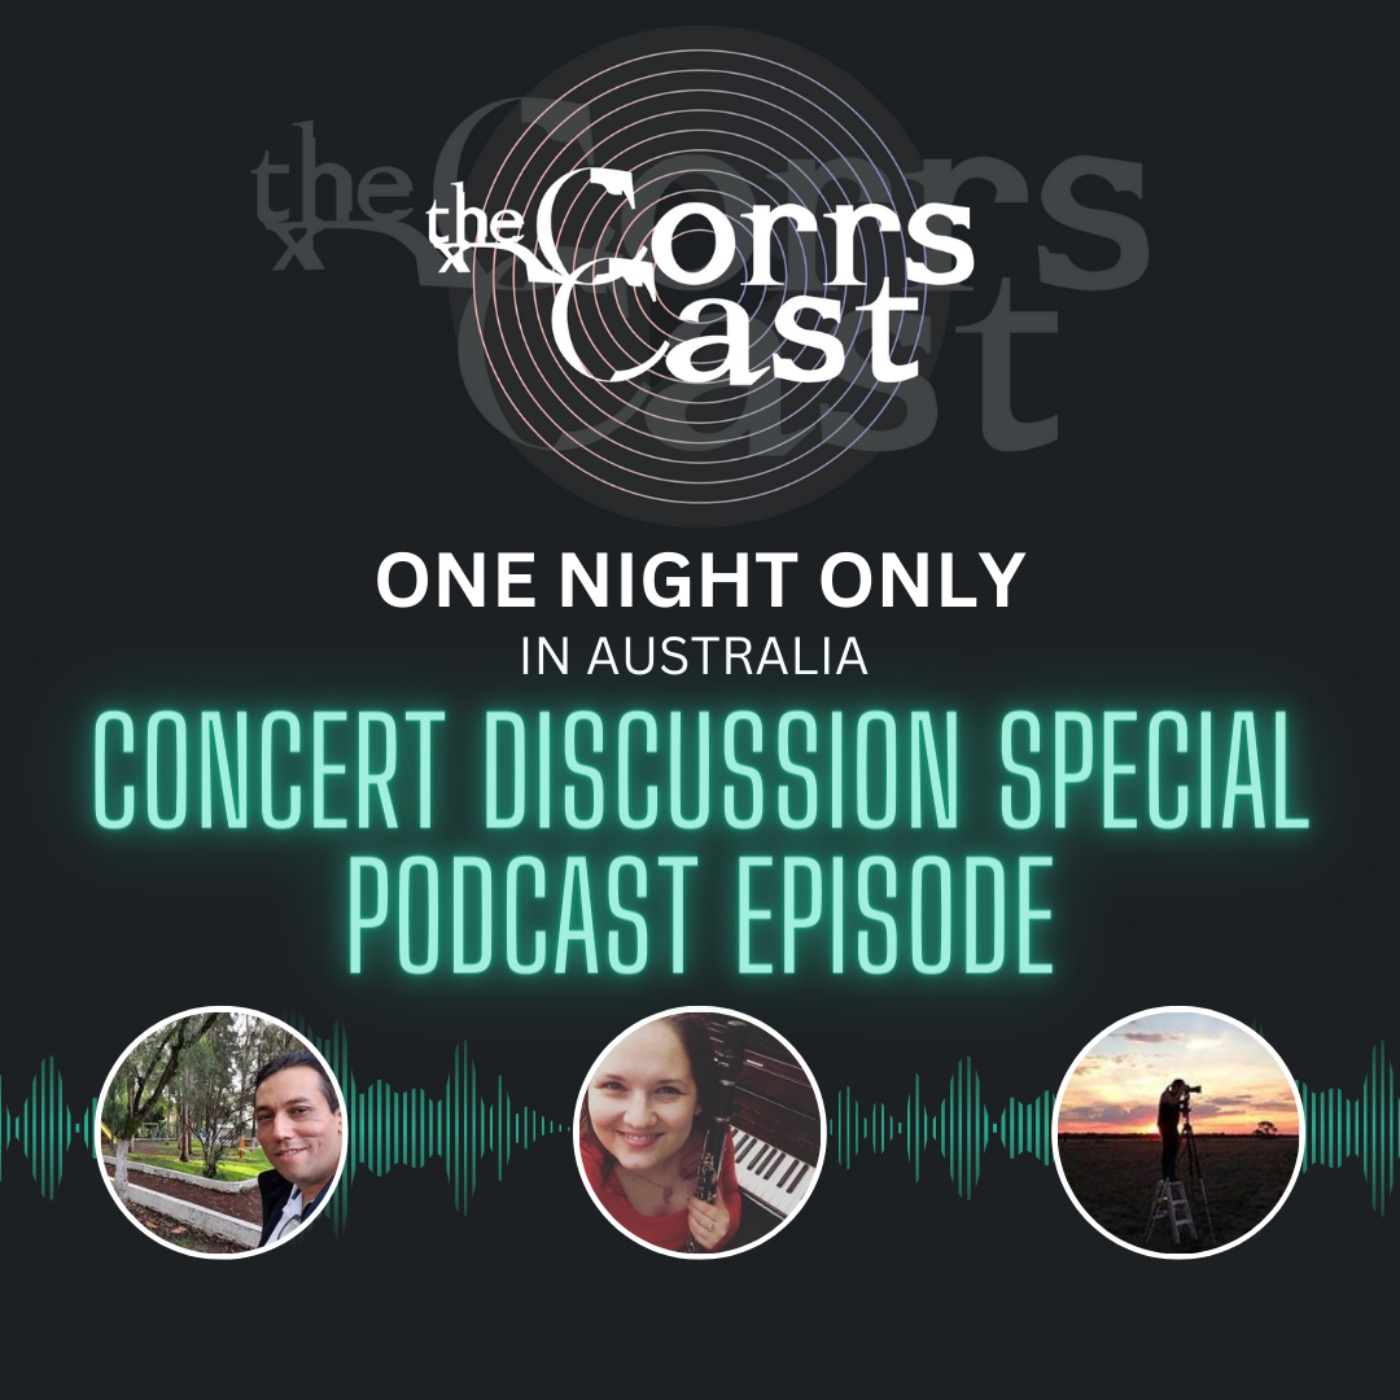 One Night Only in Australia - Concert Discussion Special